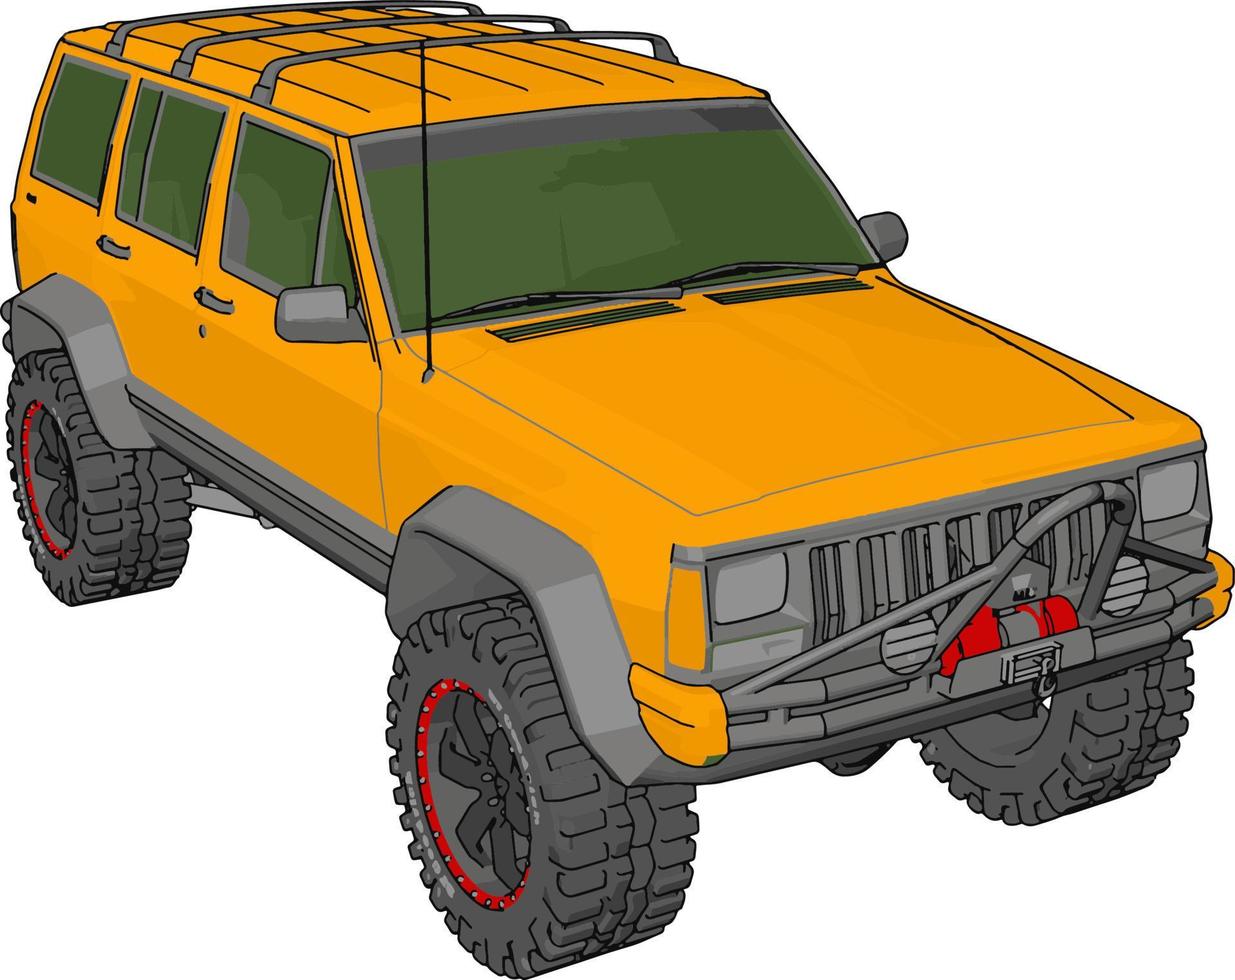 Yellow jeep cherokee, illustration, vector on white background.